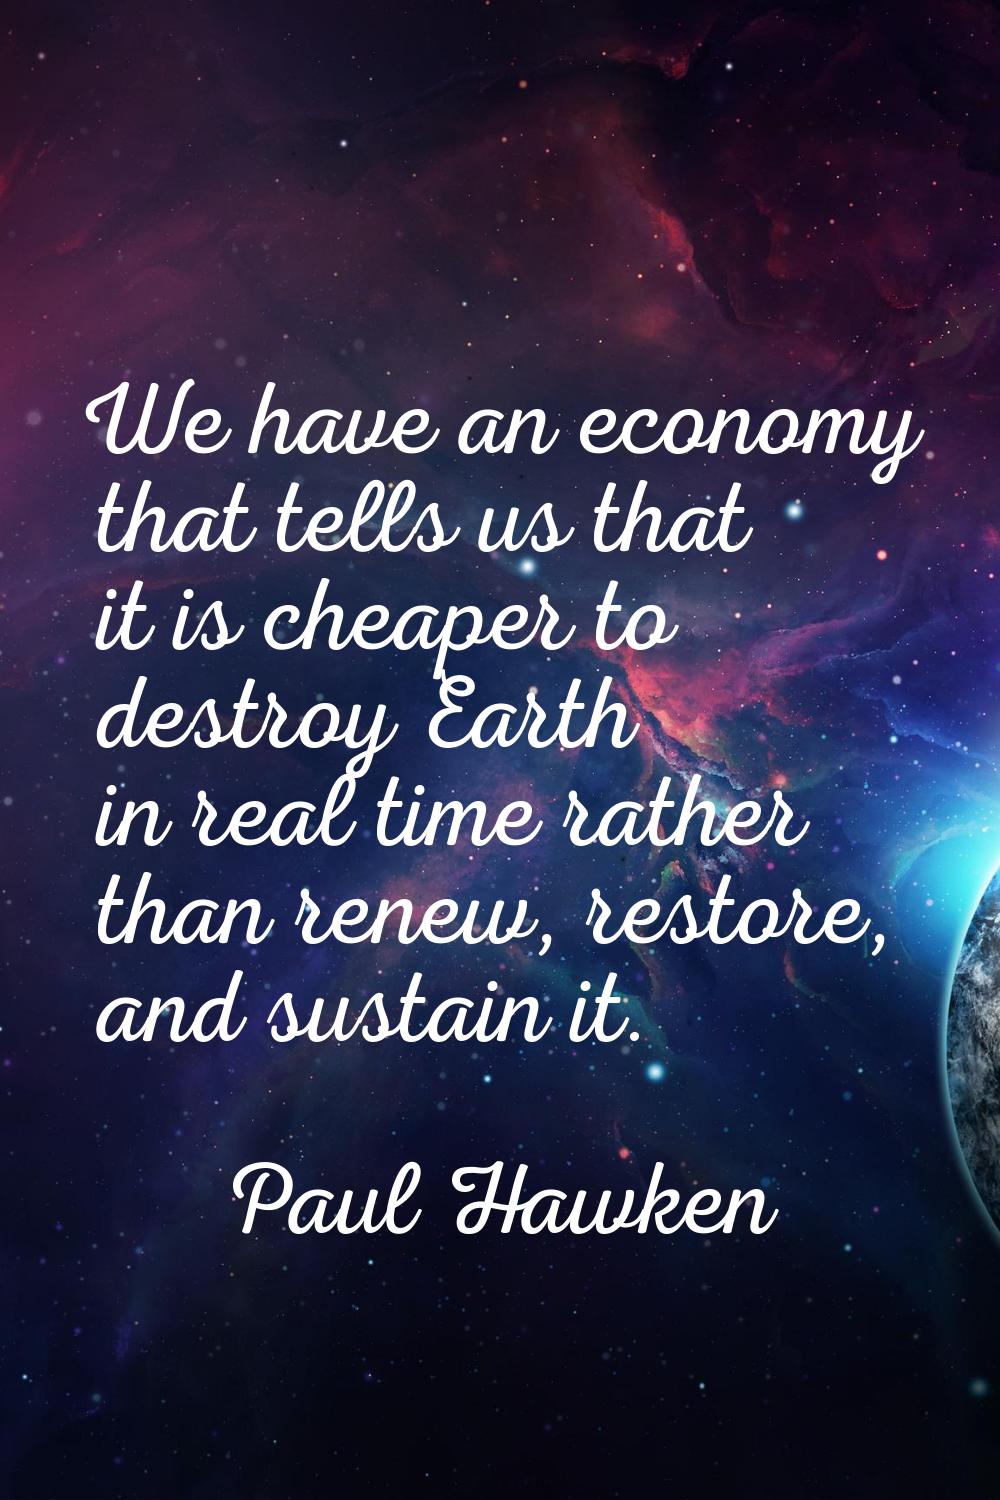 We have an economy that tells us that it is cheaper to destroy Earth in real time rather than renew